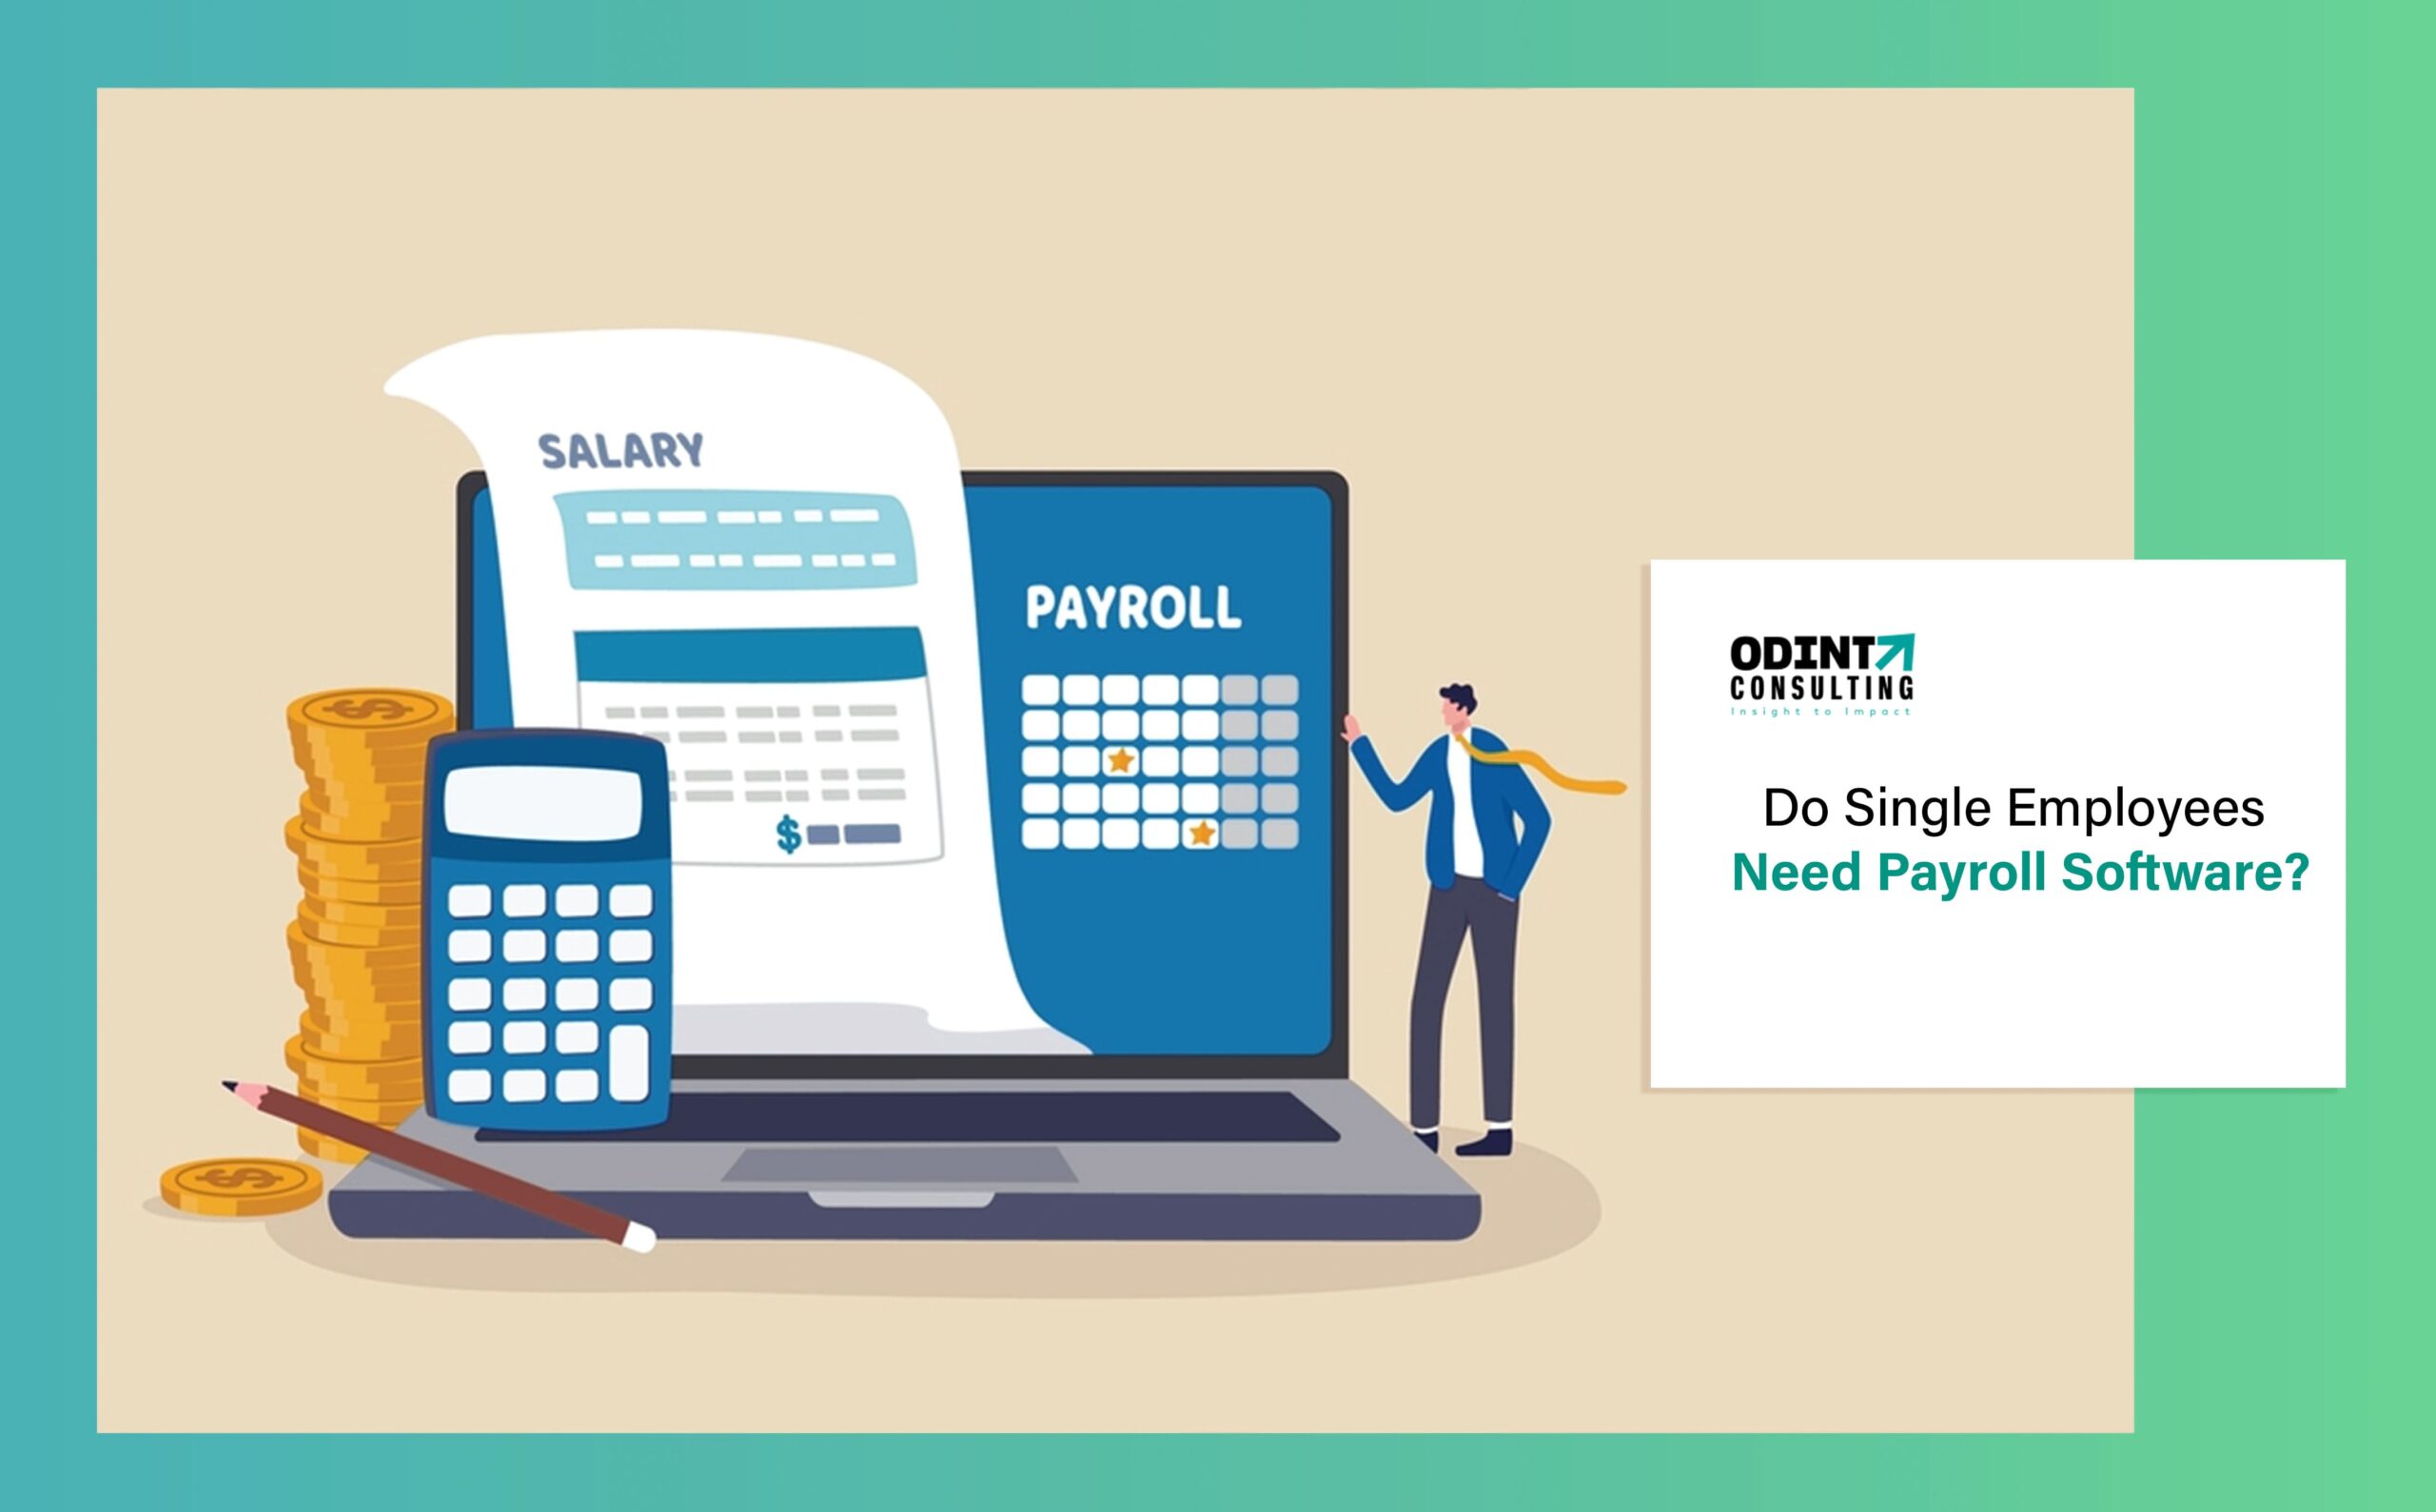 Do Single Employees Need Payroll Software?: Indian Perspective